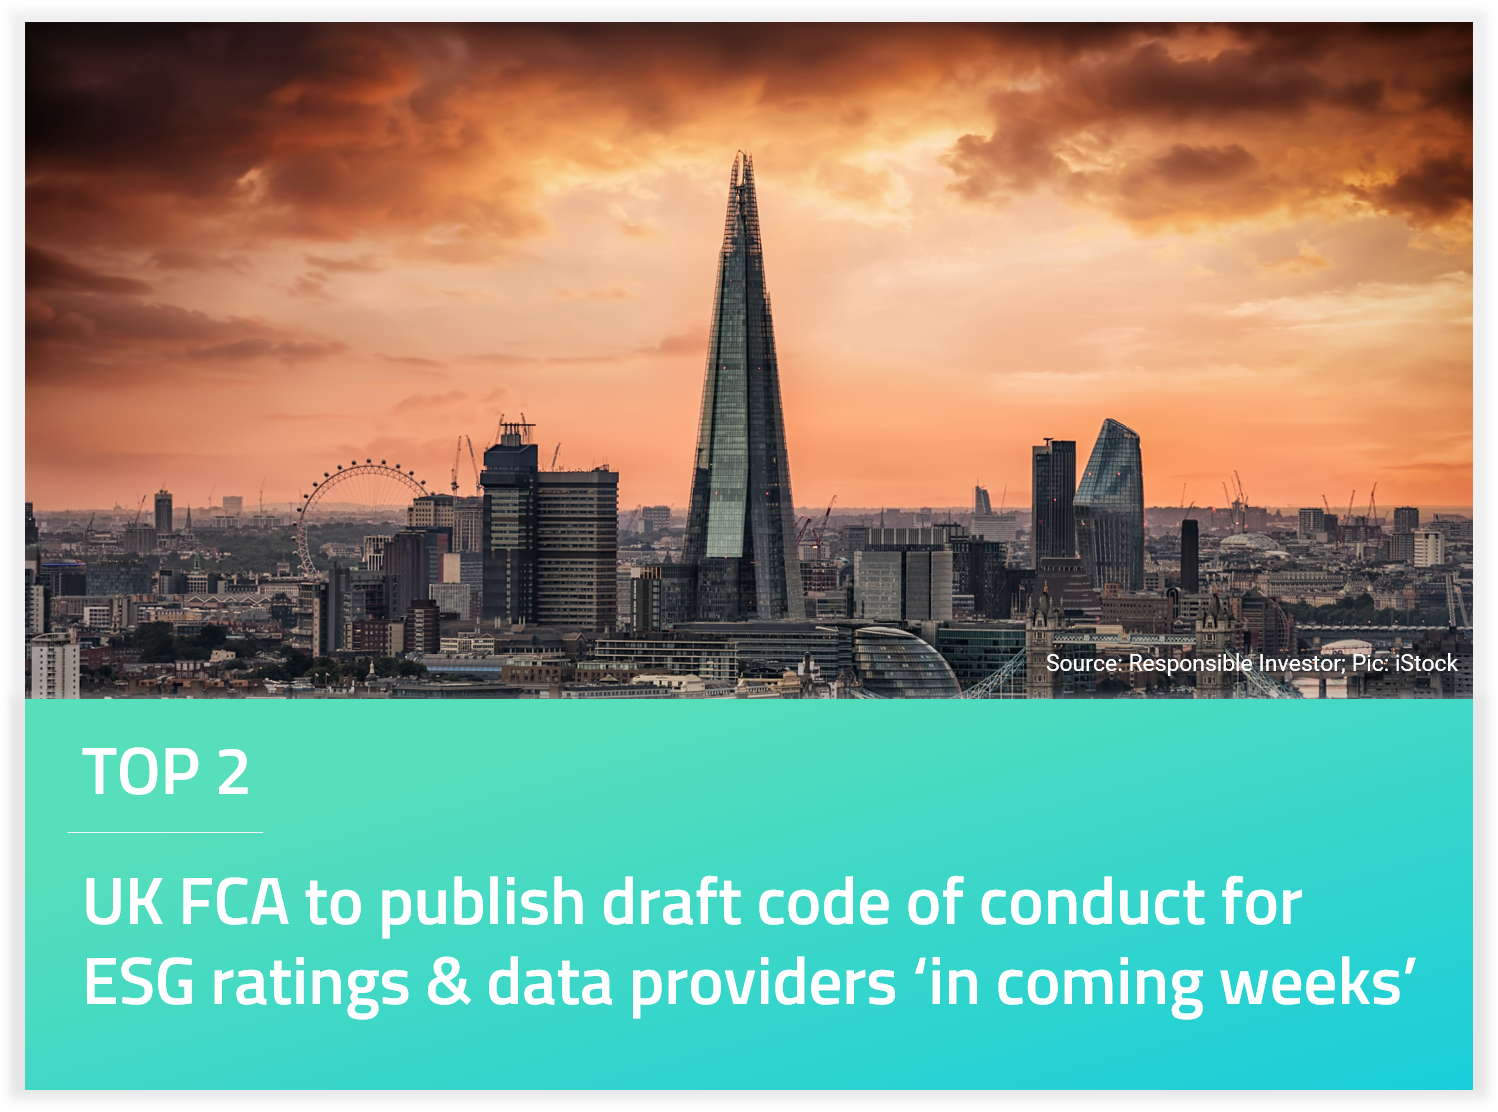 UK FCA to publish draft code of conduct for ESG ratings & data providers ‘in coming weeks’